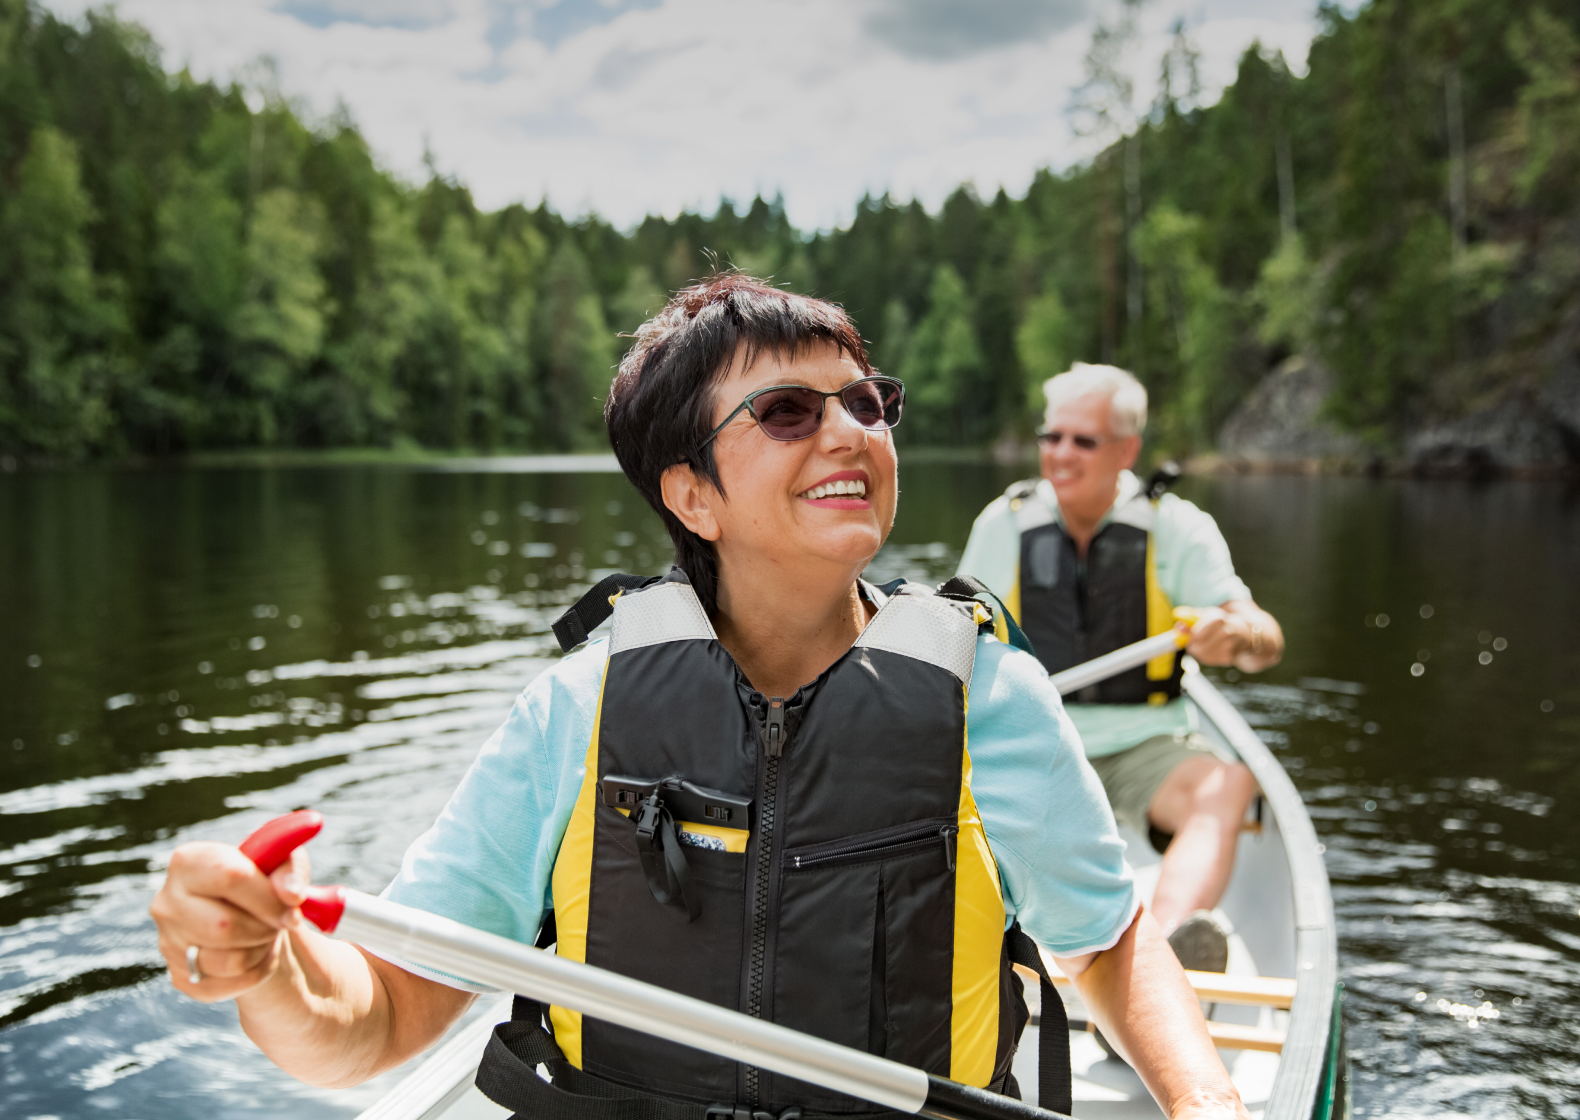 Smiling woman with a man in a boat going along a river